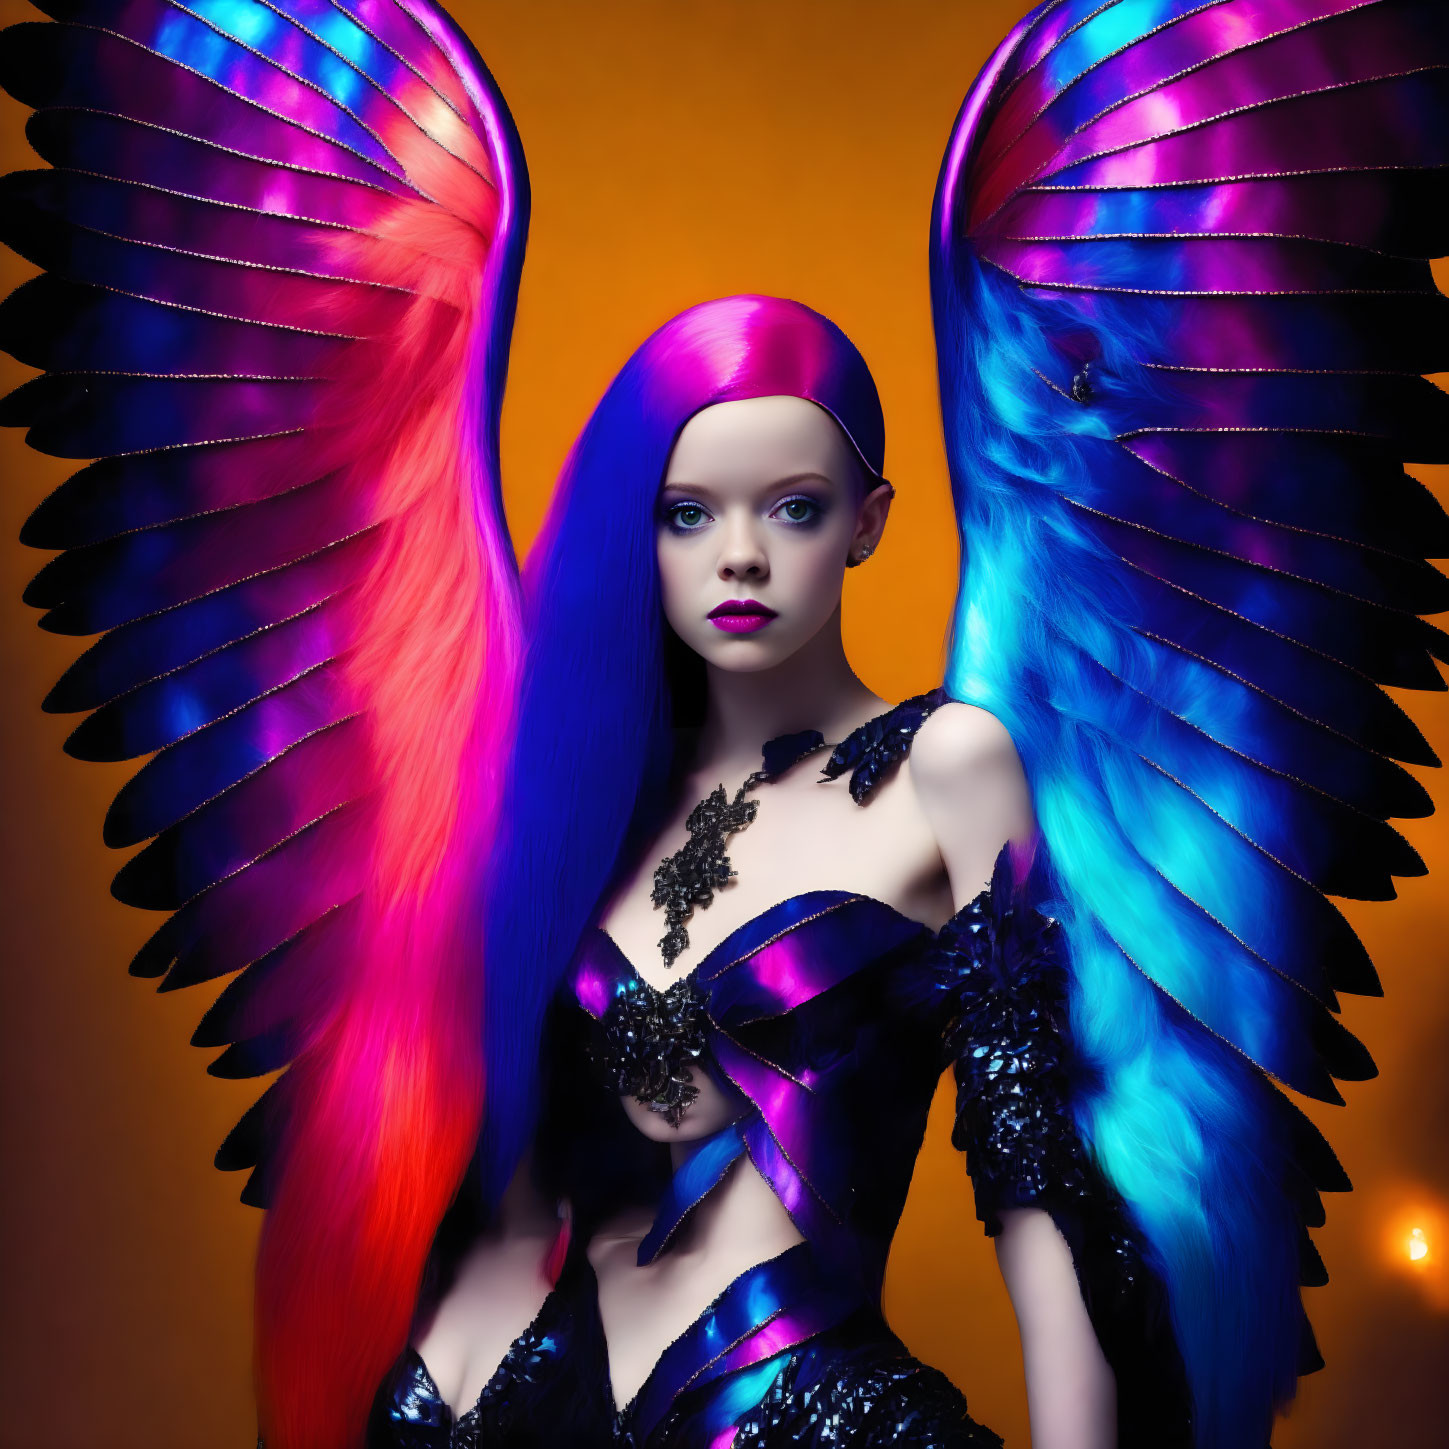 Colorful person with blue and pink hair, large wings, and ornate attire on warm gradient background